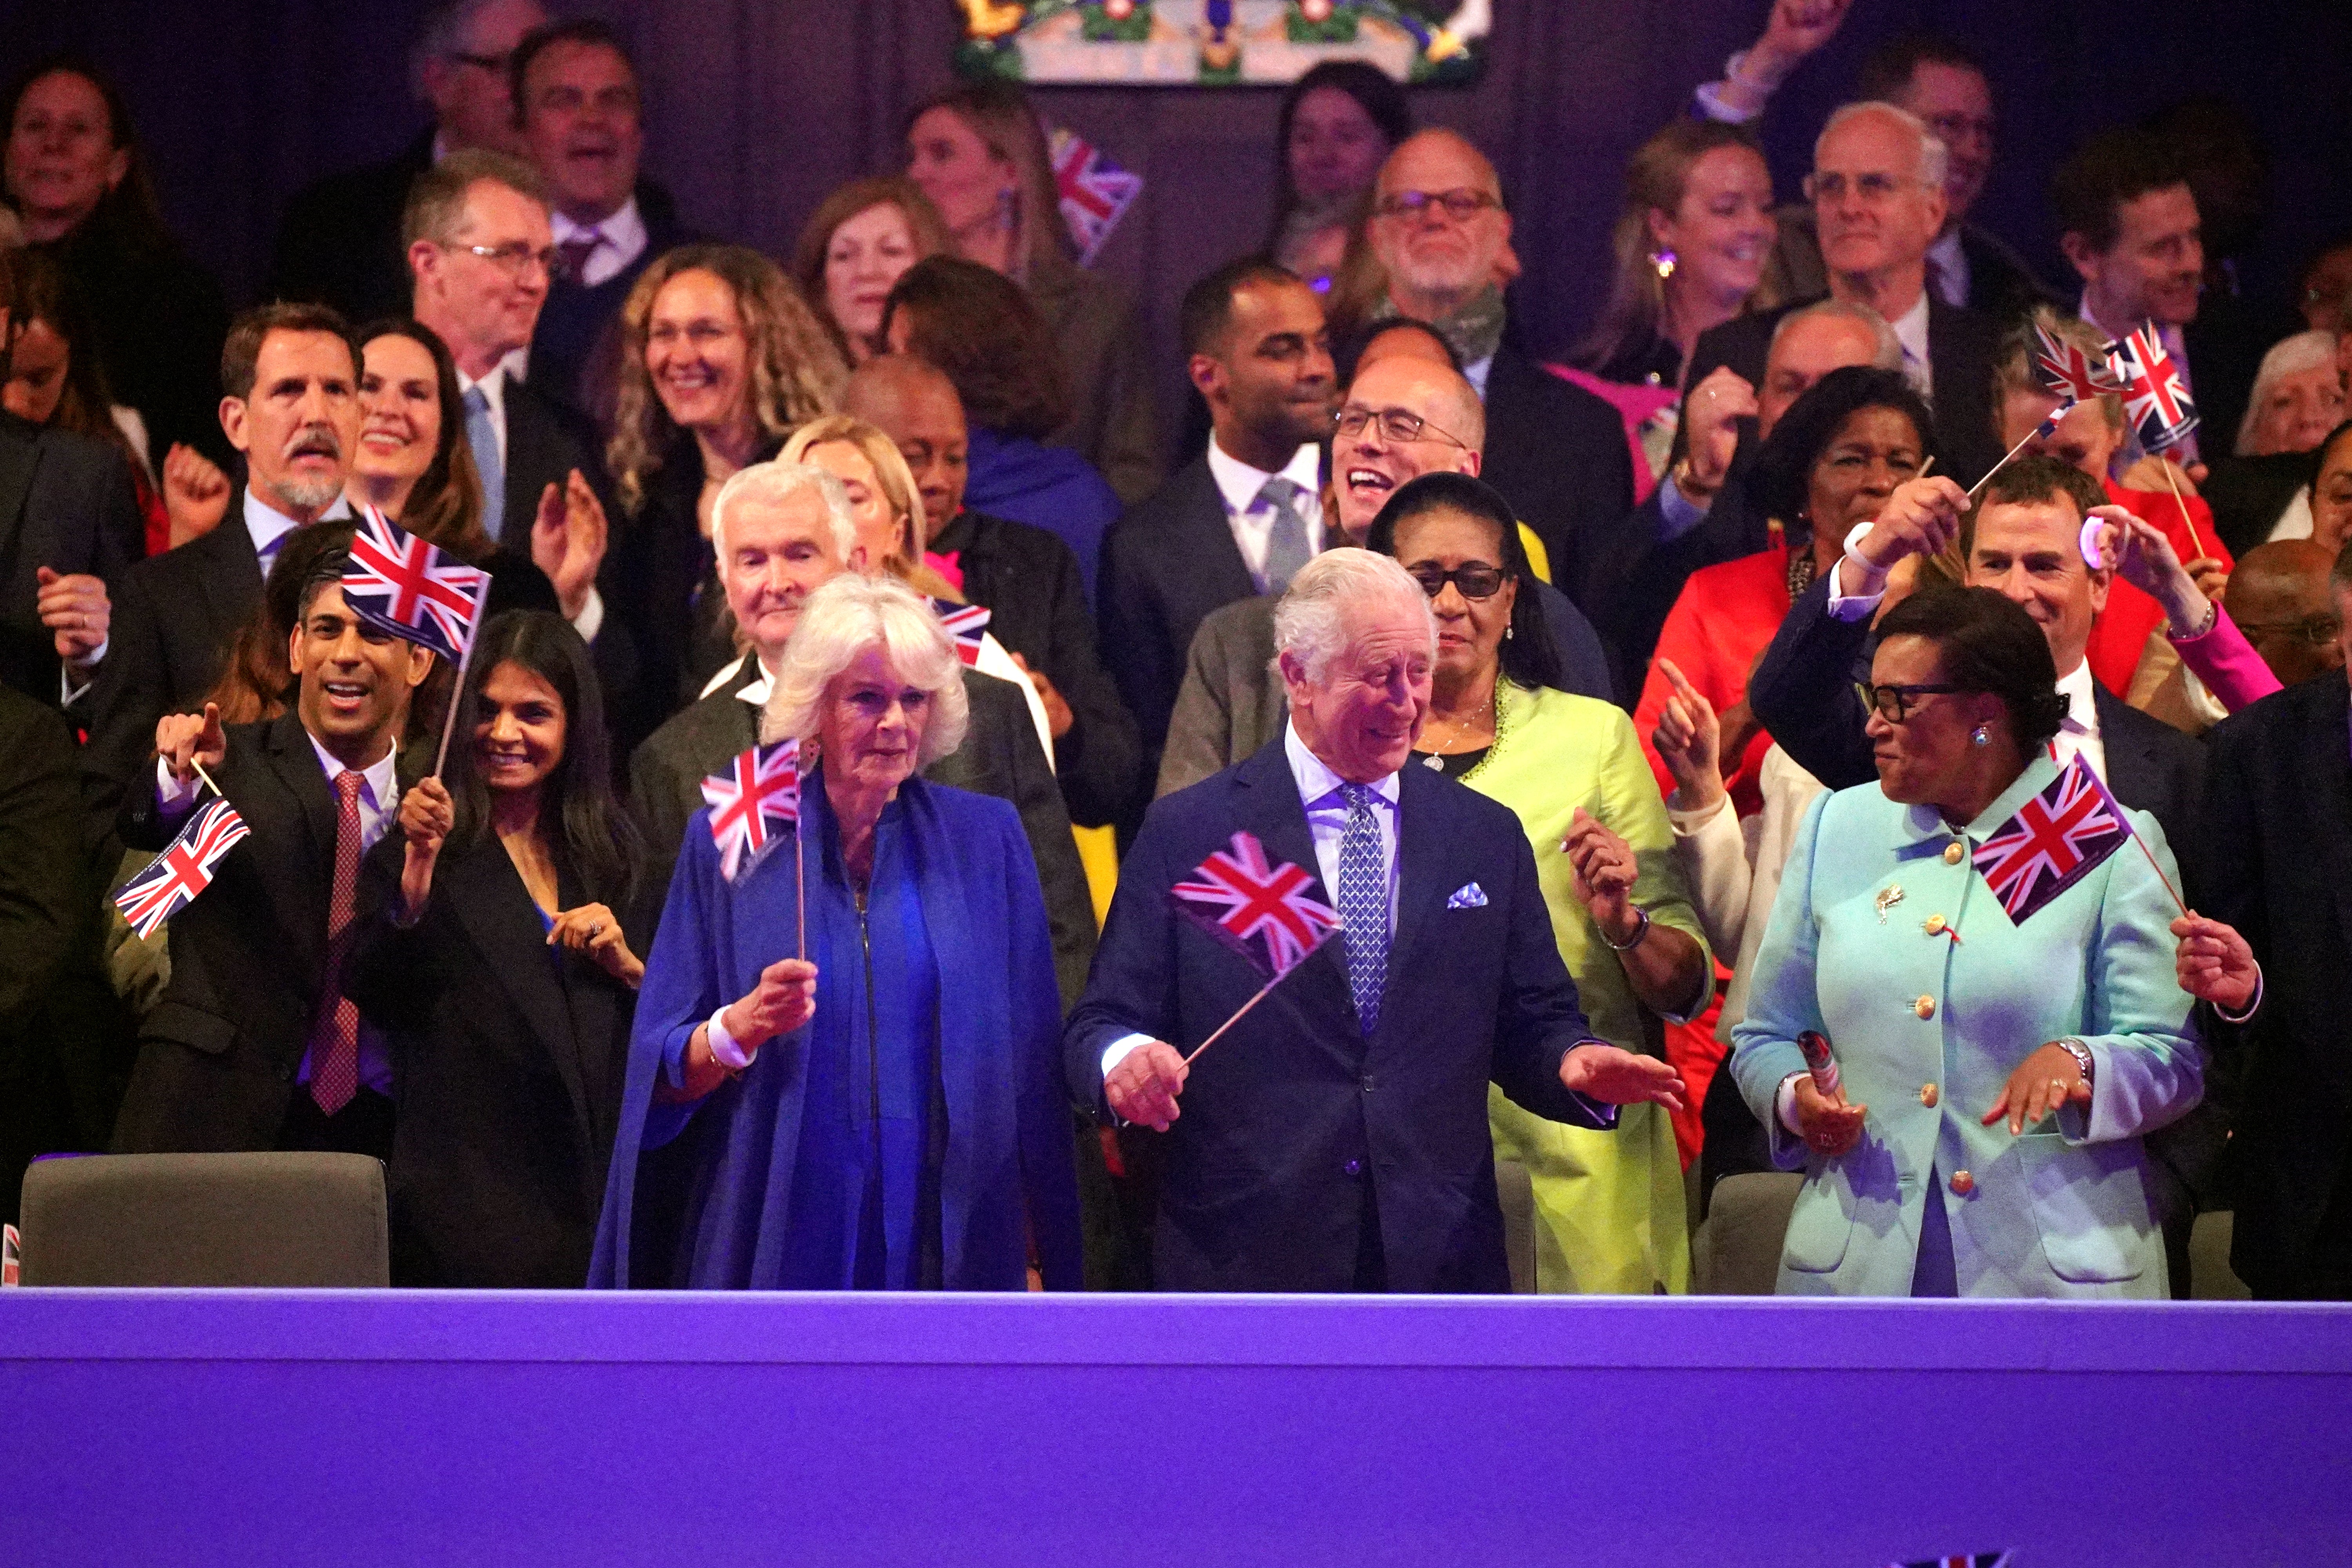 Baroness Scotland (right) next to the King at the concert